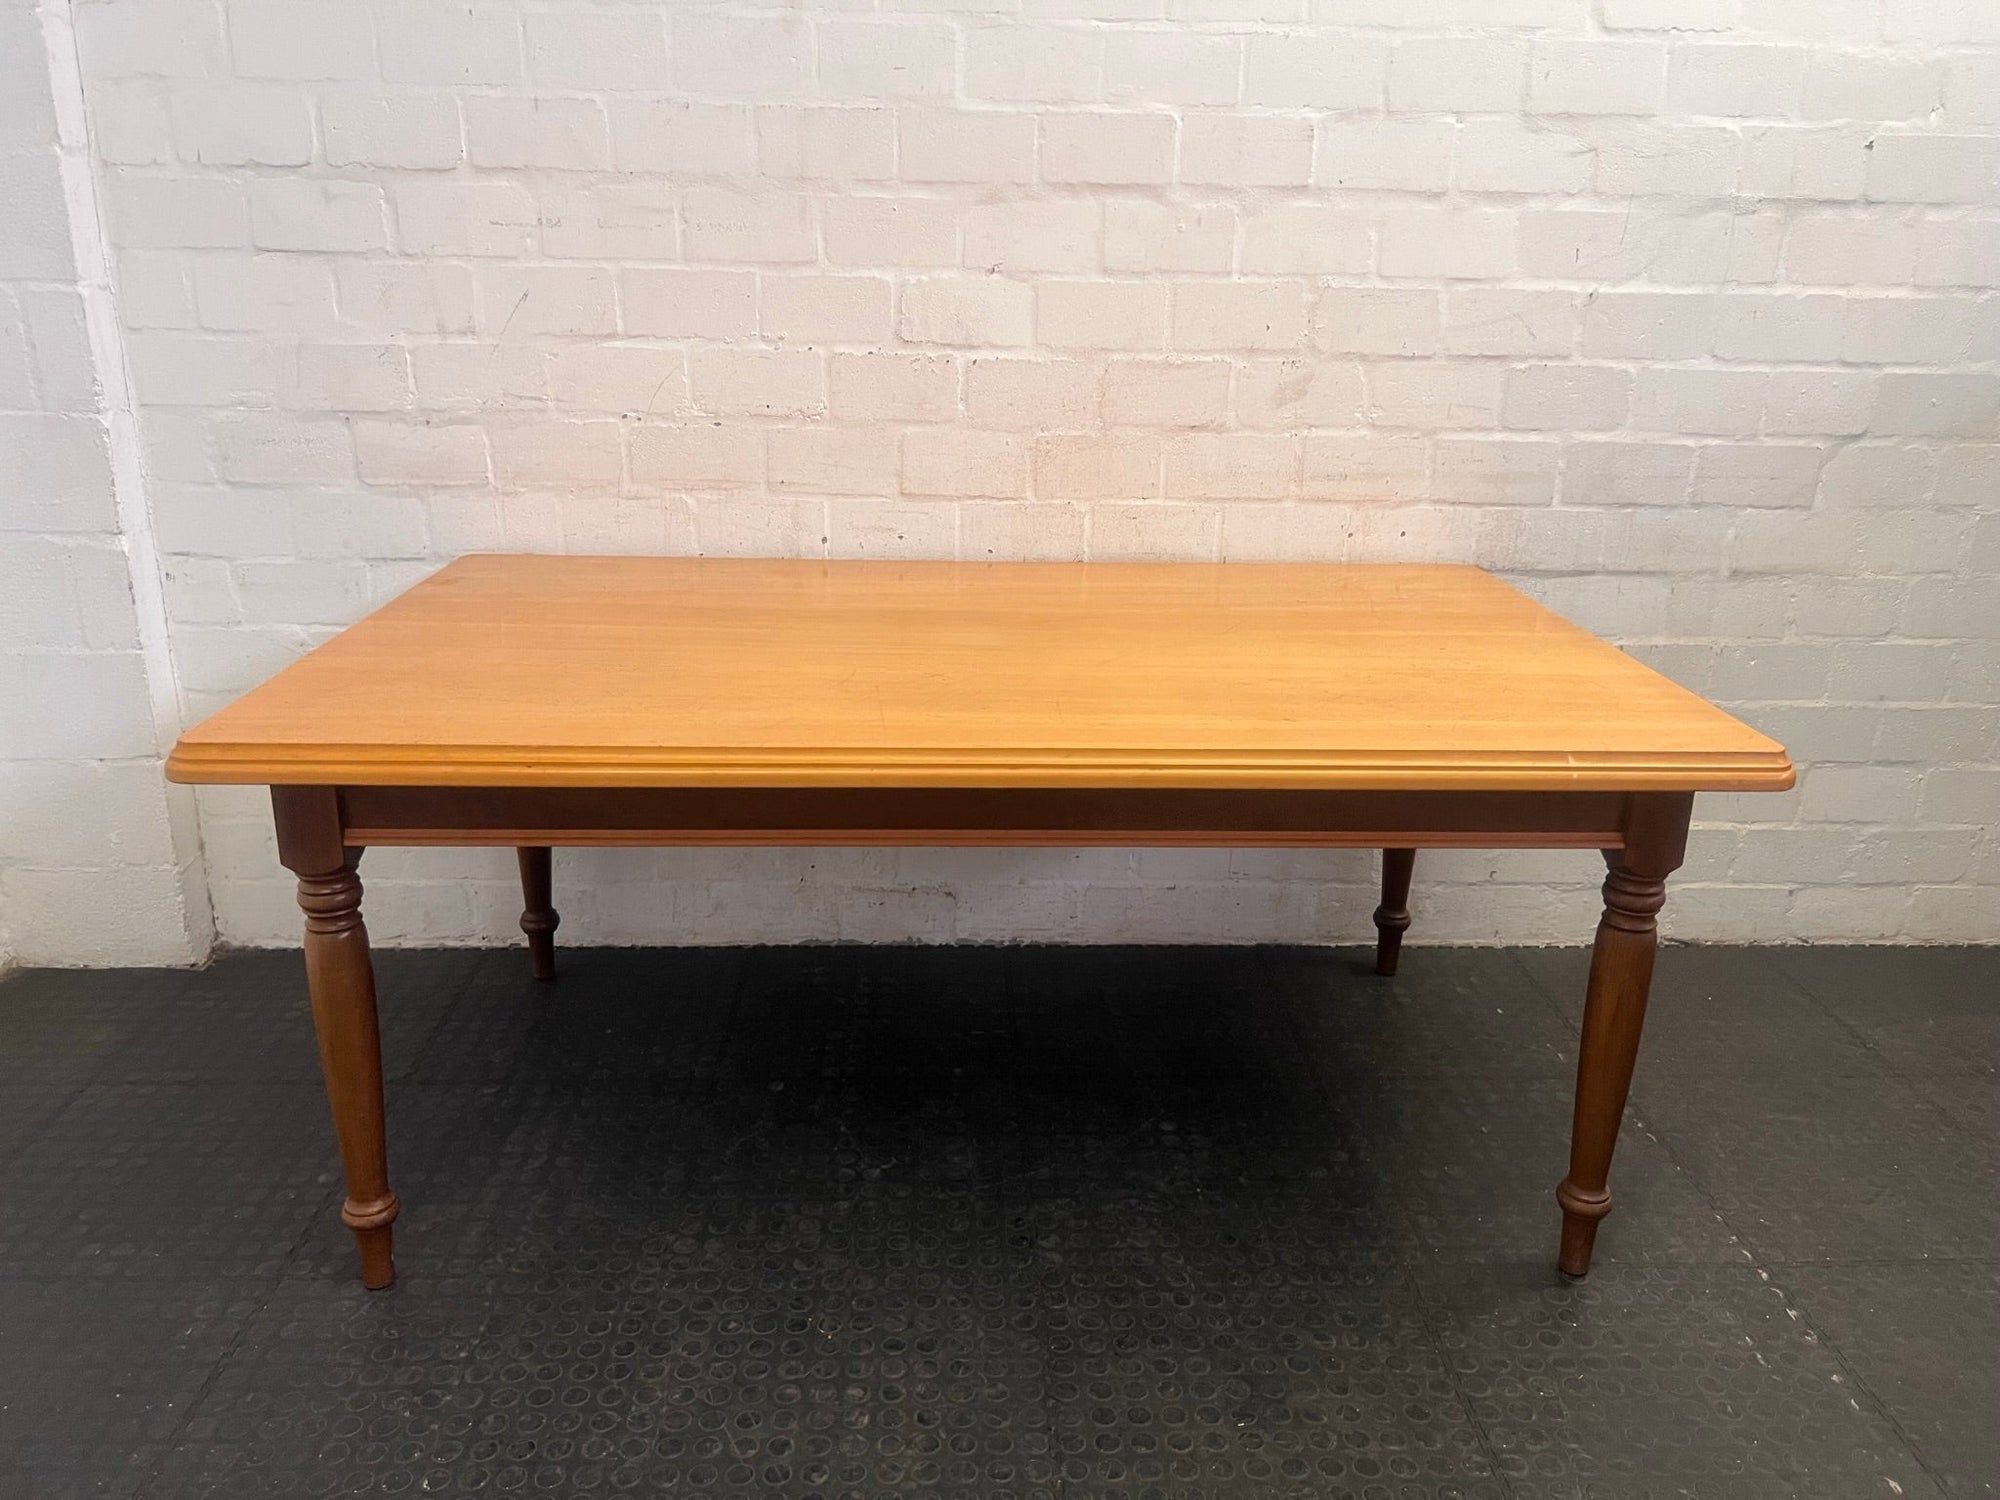 Wooden Light Oak Six Seater Dining Table with Turned Legs (1.1m x 1.78m) - REDUCED